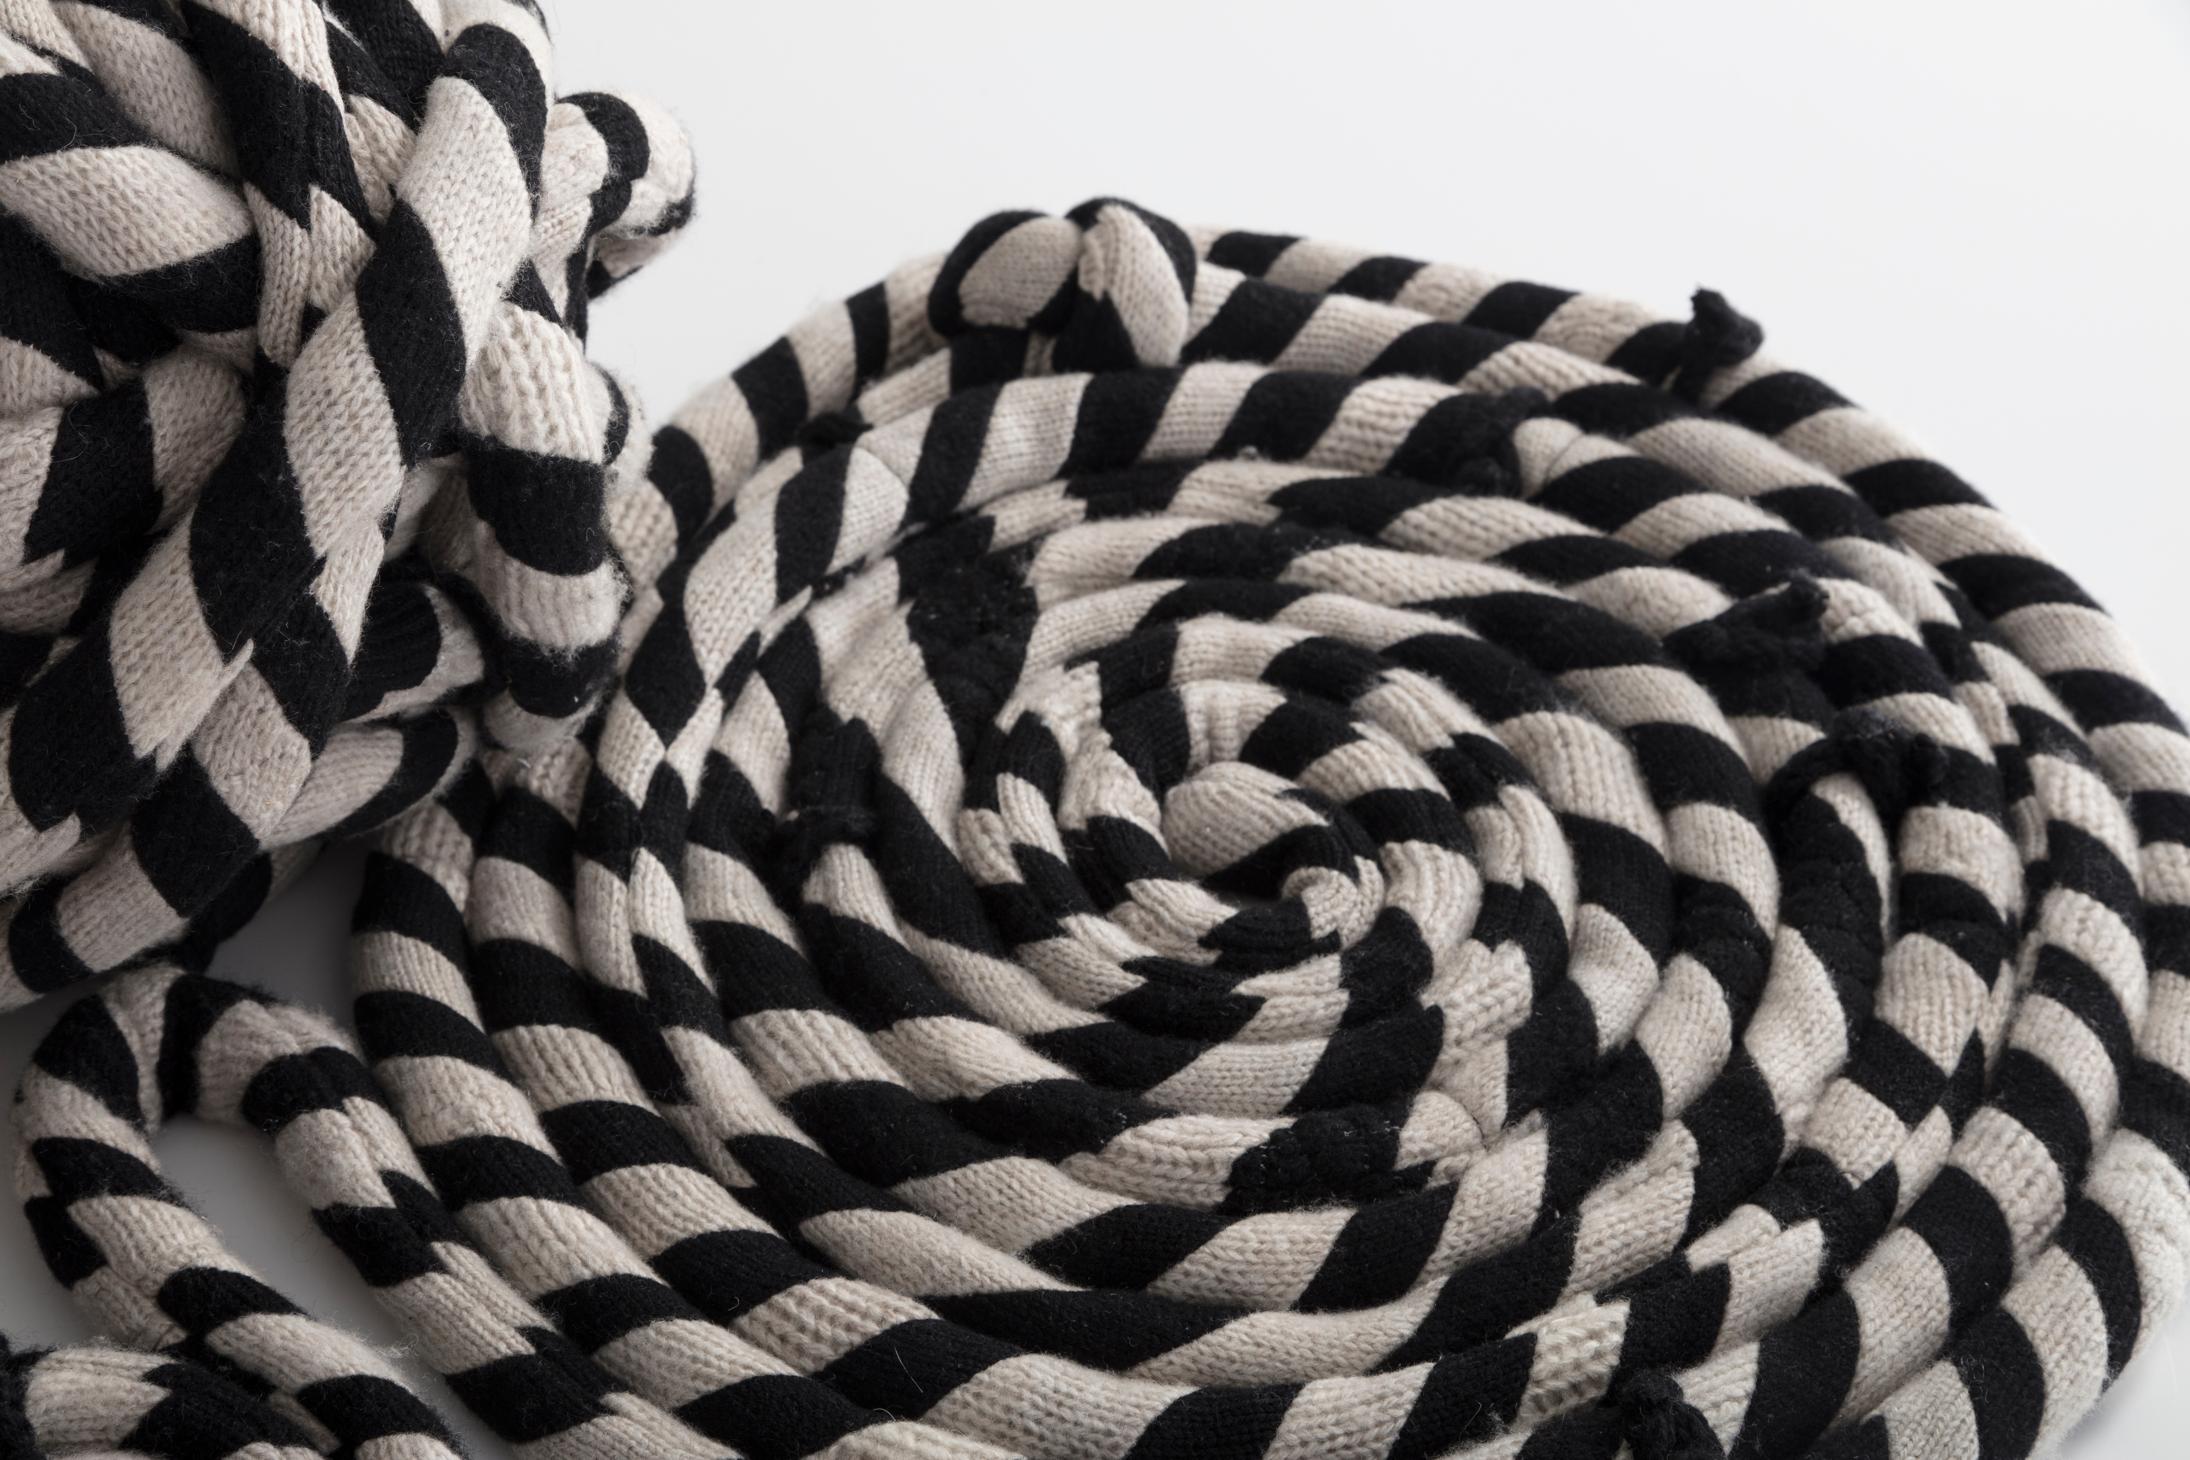 Modern Coil Sculpture in Black and White Cashmere by Greg Chait, 2016